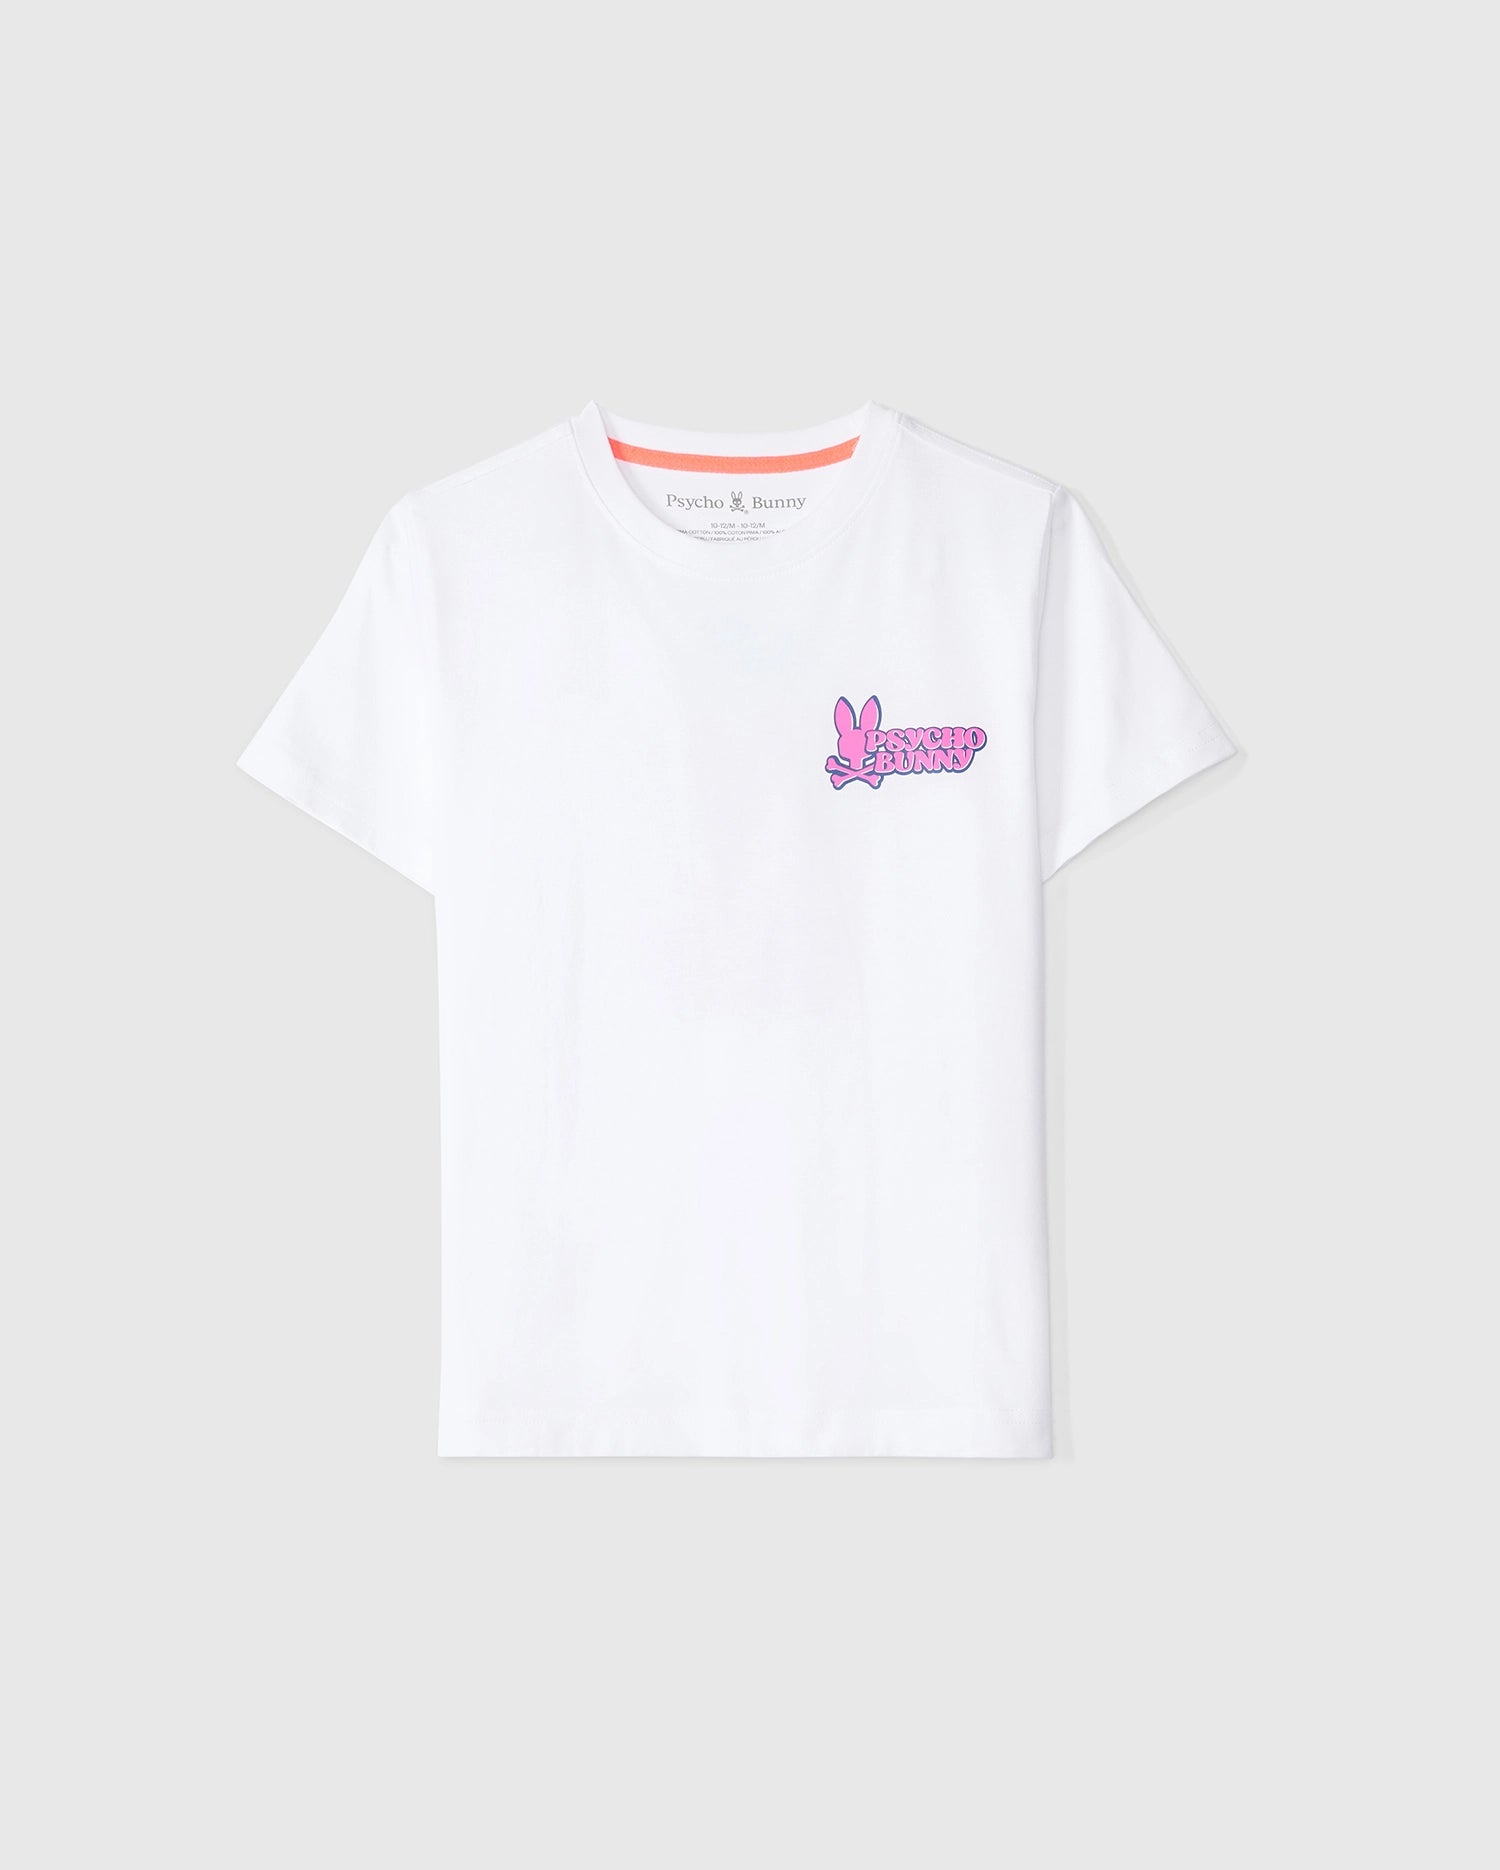 A KIDS REDLAND GRAPHIC TEE - B0U613C200 by Psycho Bunny made from 100% Pima cotton featuring a small bunny design on the left chest area with the text 